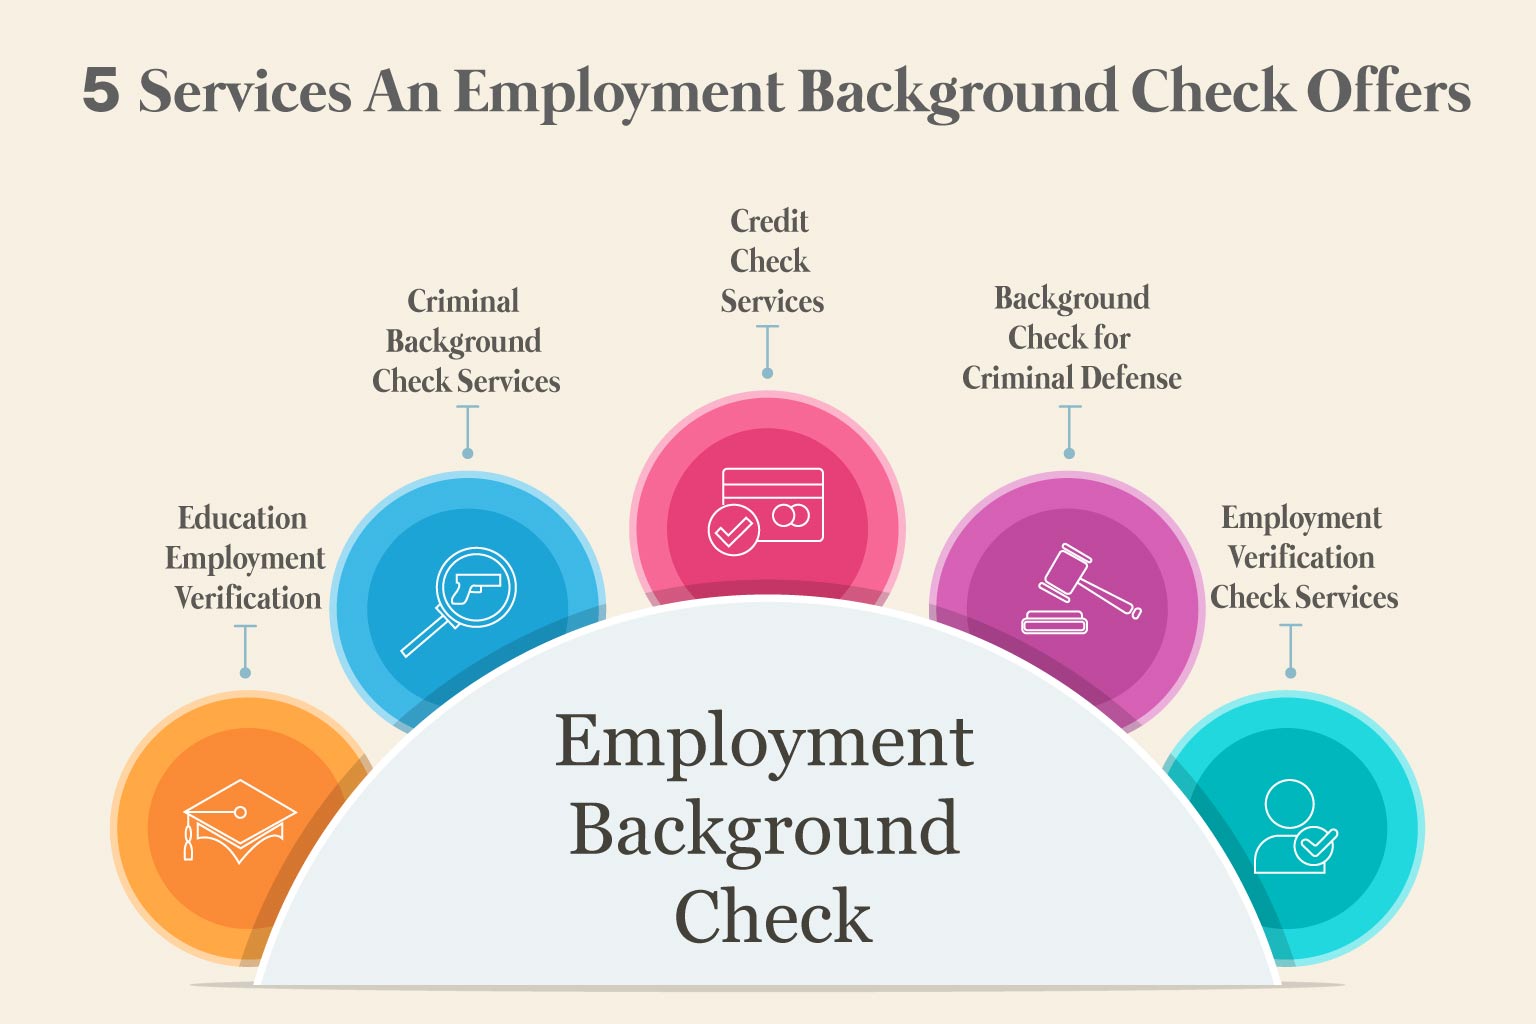 5 Services An Employment Background Check Offers